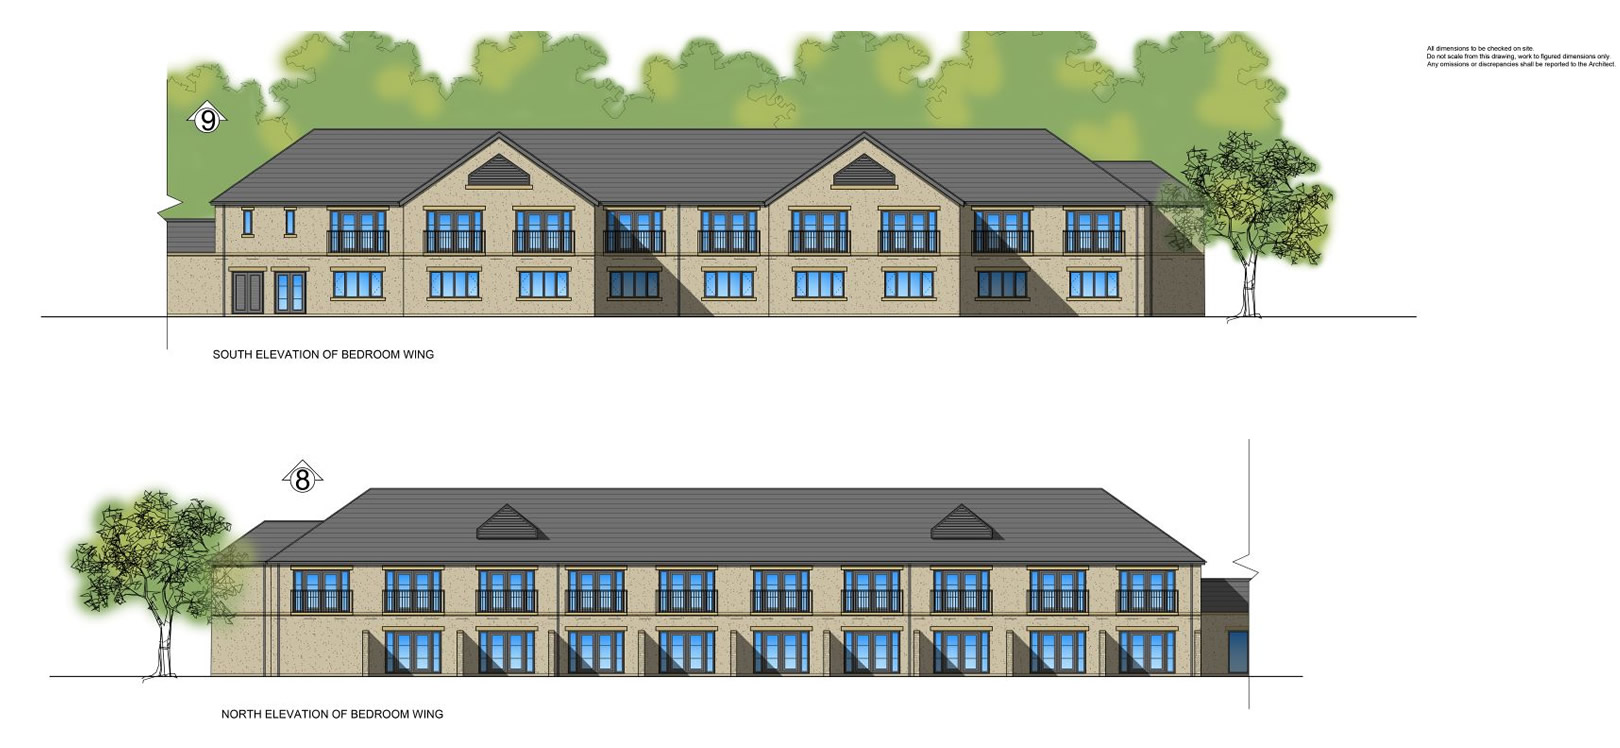 Proposed bedroom wing plan for Hardwick Hall Hotel